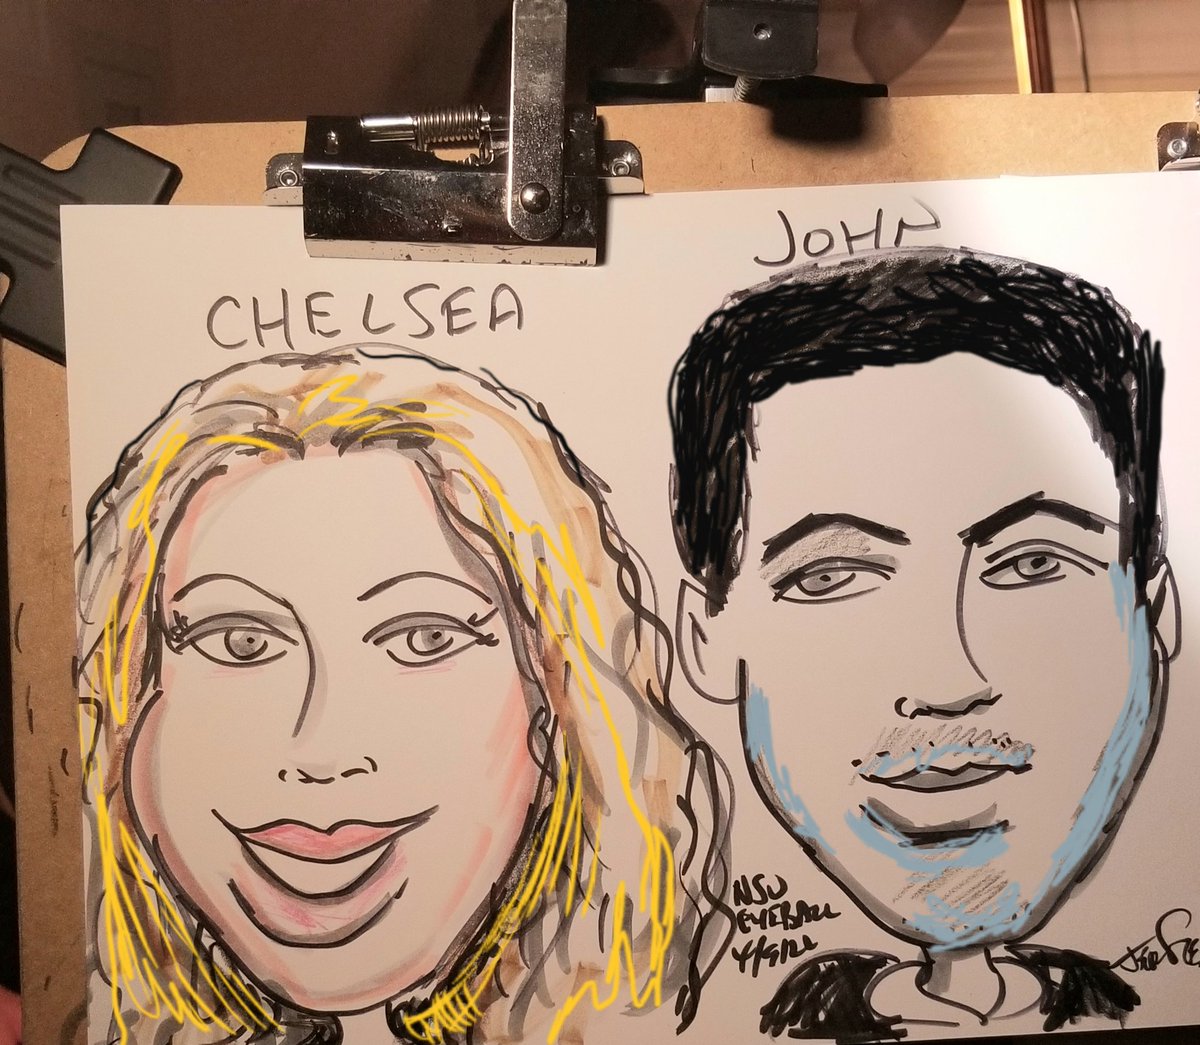 #NovaSoutheasternUniversity #CollegeofOptometry #Banquet #MargaritavilleHollywoodBeach in #HollywoodFlorida south of #FortLauderdale  included #Caricature drawings by award-winning #FortLauderdaleCaricatureArtist Jeff Sterling of FloridaCaricatures.Com